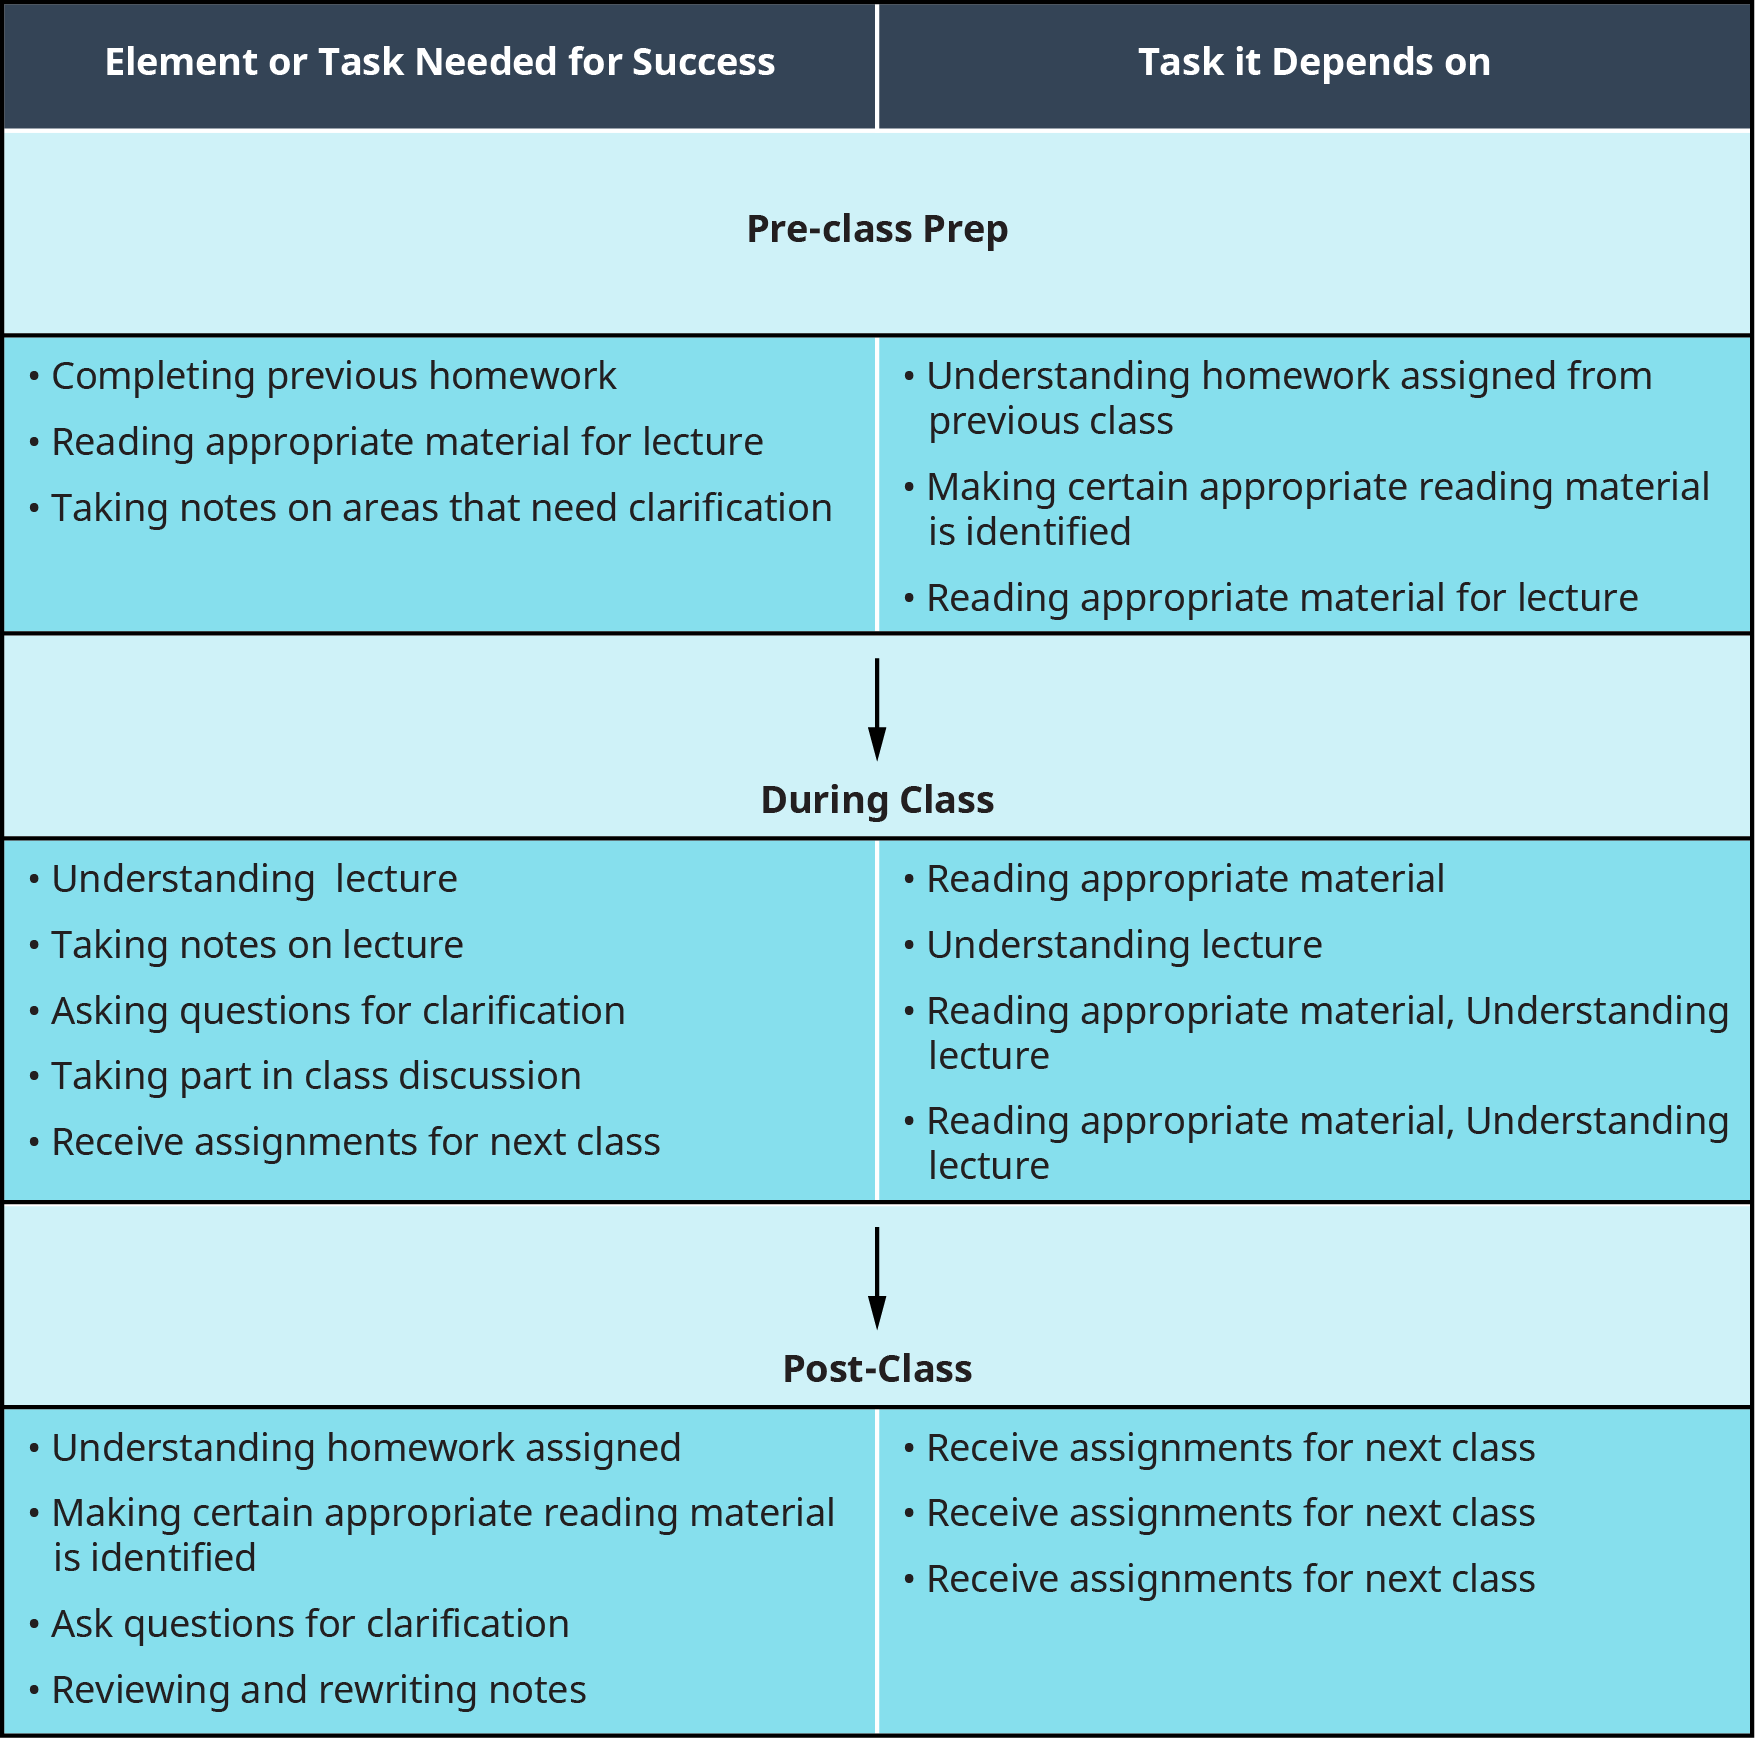 Chart split into two main sections of tasks needed for success and the tasks it depends for in pre-class prep, during class, and post-class..